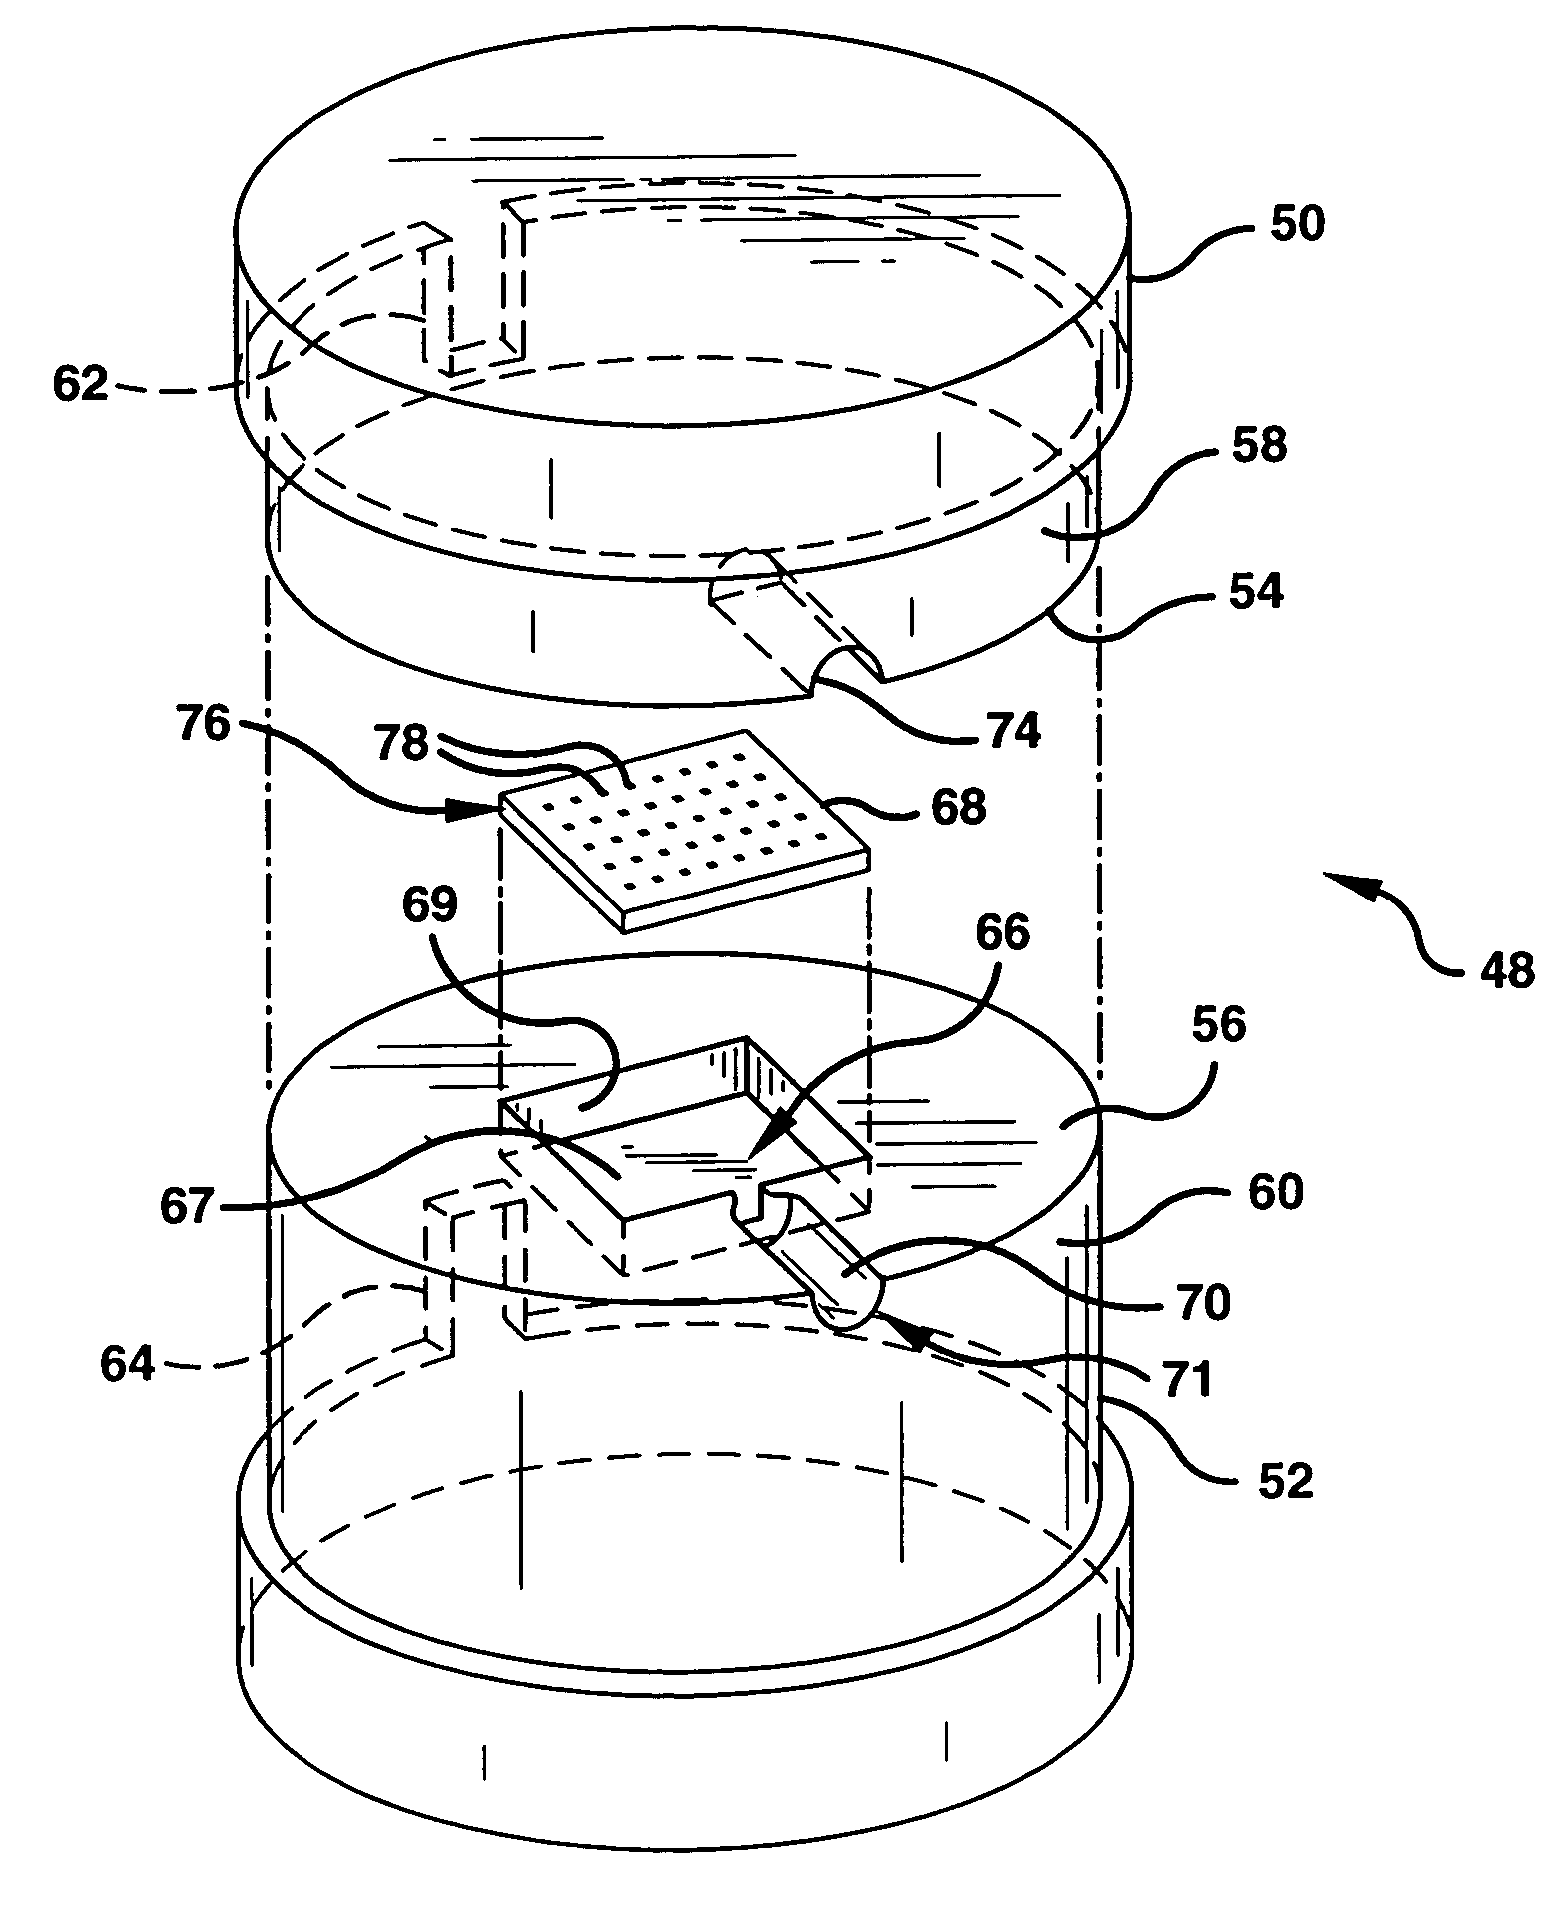 Method and apparatus for manufacturing a device